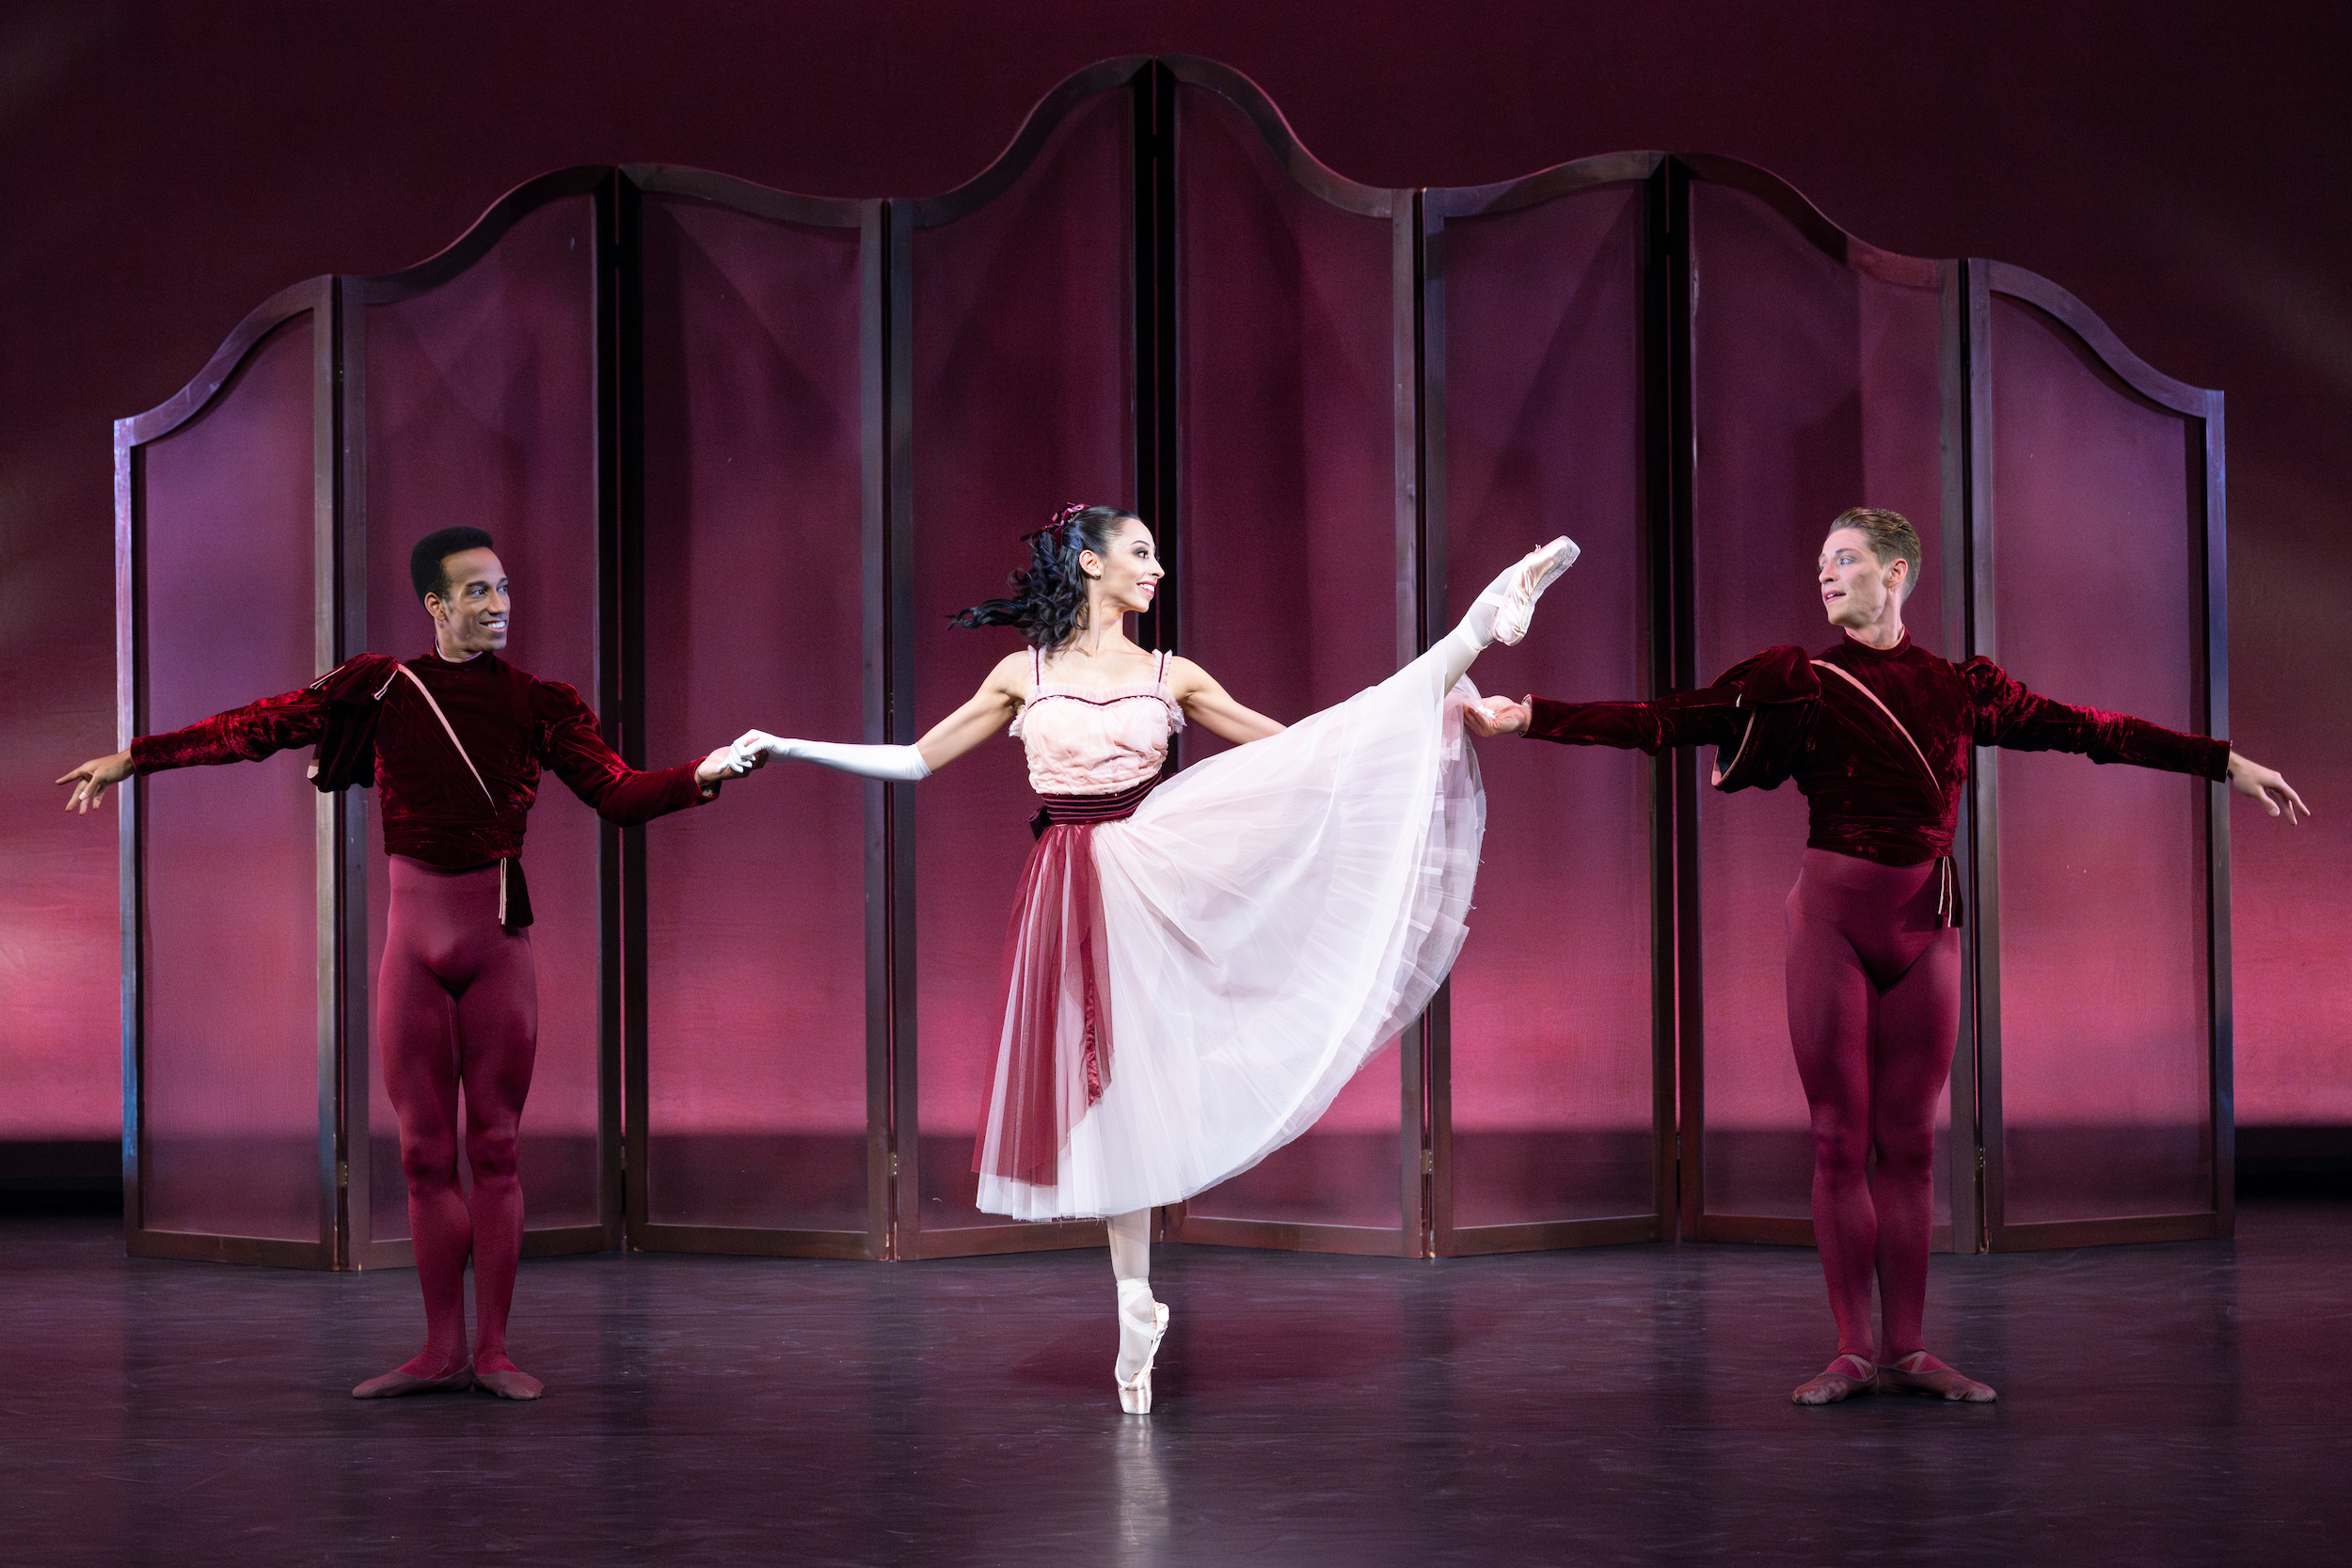 Ricardo Rhodes, Jessica Assef, and Daniel Pratt, three professional ballet dancers, perform a pas de trois onstage in front of a burgundy backdrop. Assef, wearing a light pink calf-length tutu with a burgundy sash, stands between the men, raises her left leg in développé a la seconde on pointe. She holds her arms out to the side, holding each partner's hand, and looks toward Pratt on her left. The men, wearing burgundy tights and matching velvet tunics, stand in a small first position and smile at Assef.